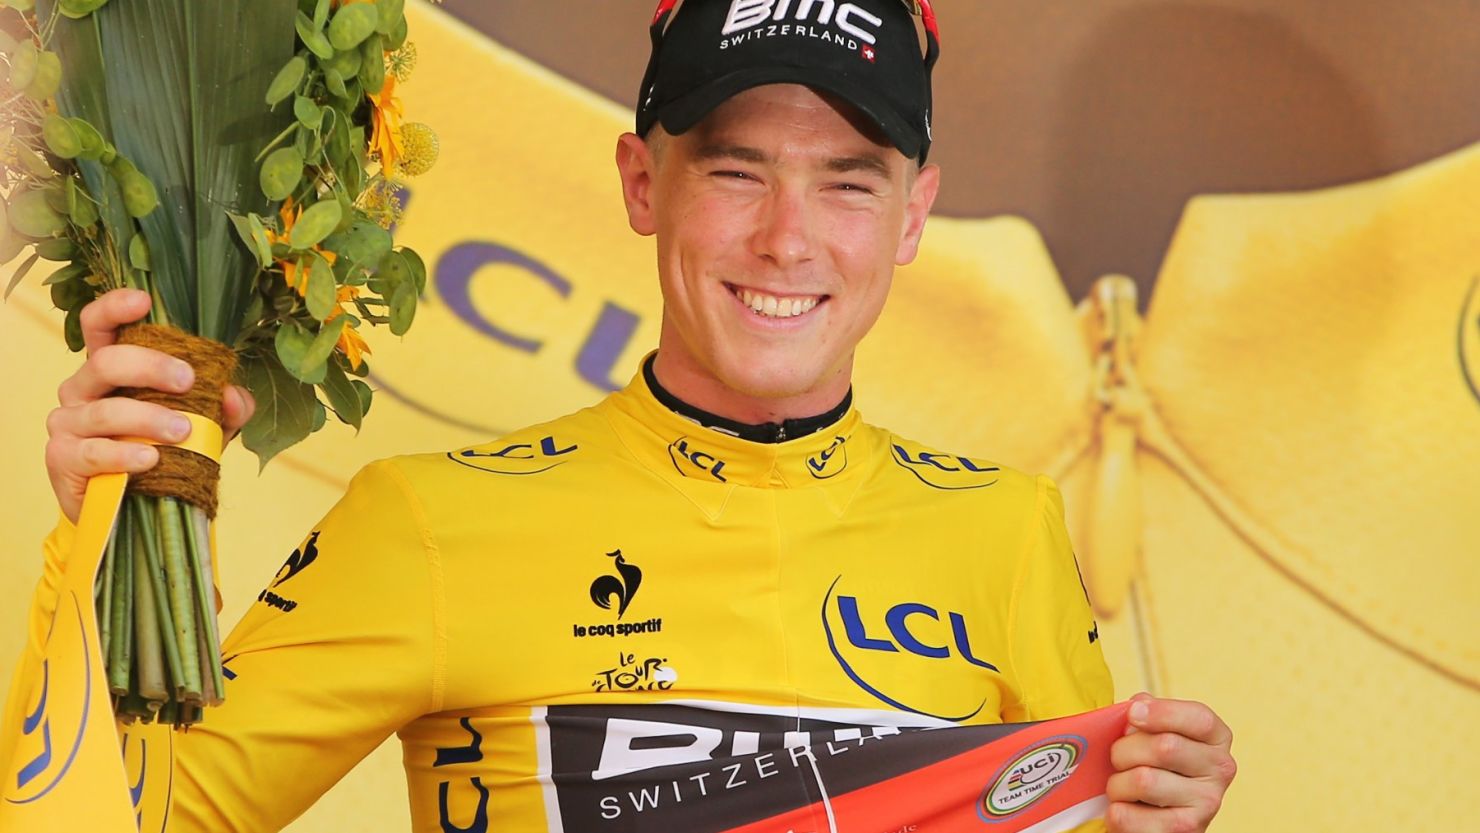 Australia's Rohan Dennis is the first man to don the yellow jersey in the 2015 Tour de France.